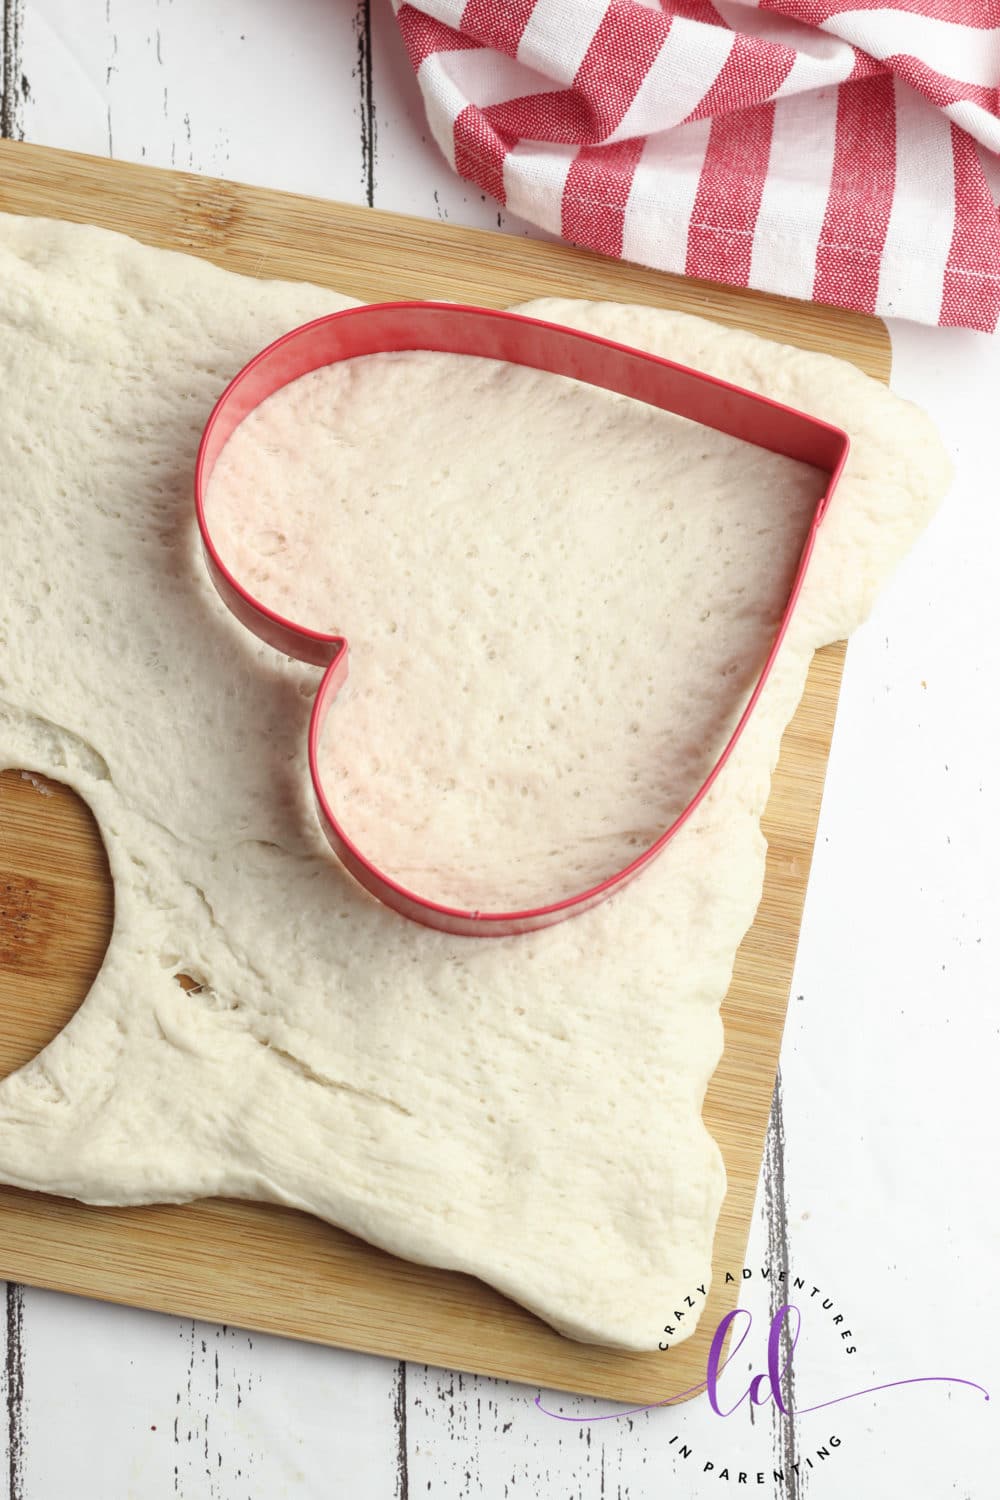 Roll Out and Cut Dough into Heart Shapes for Heart-Shaped Pizza for Valentine's Day